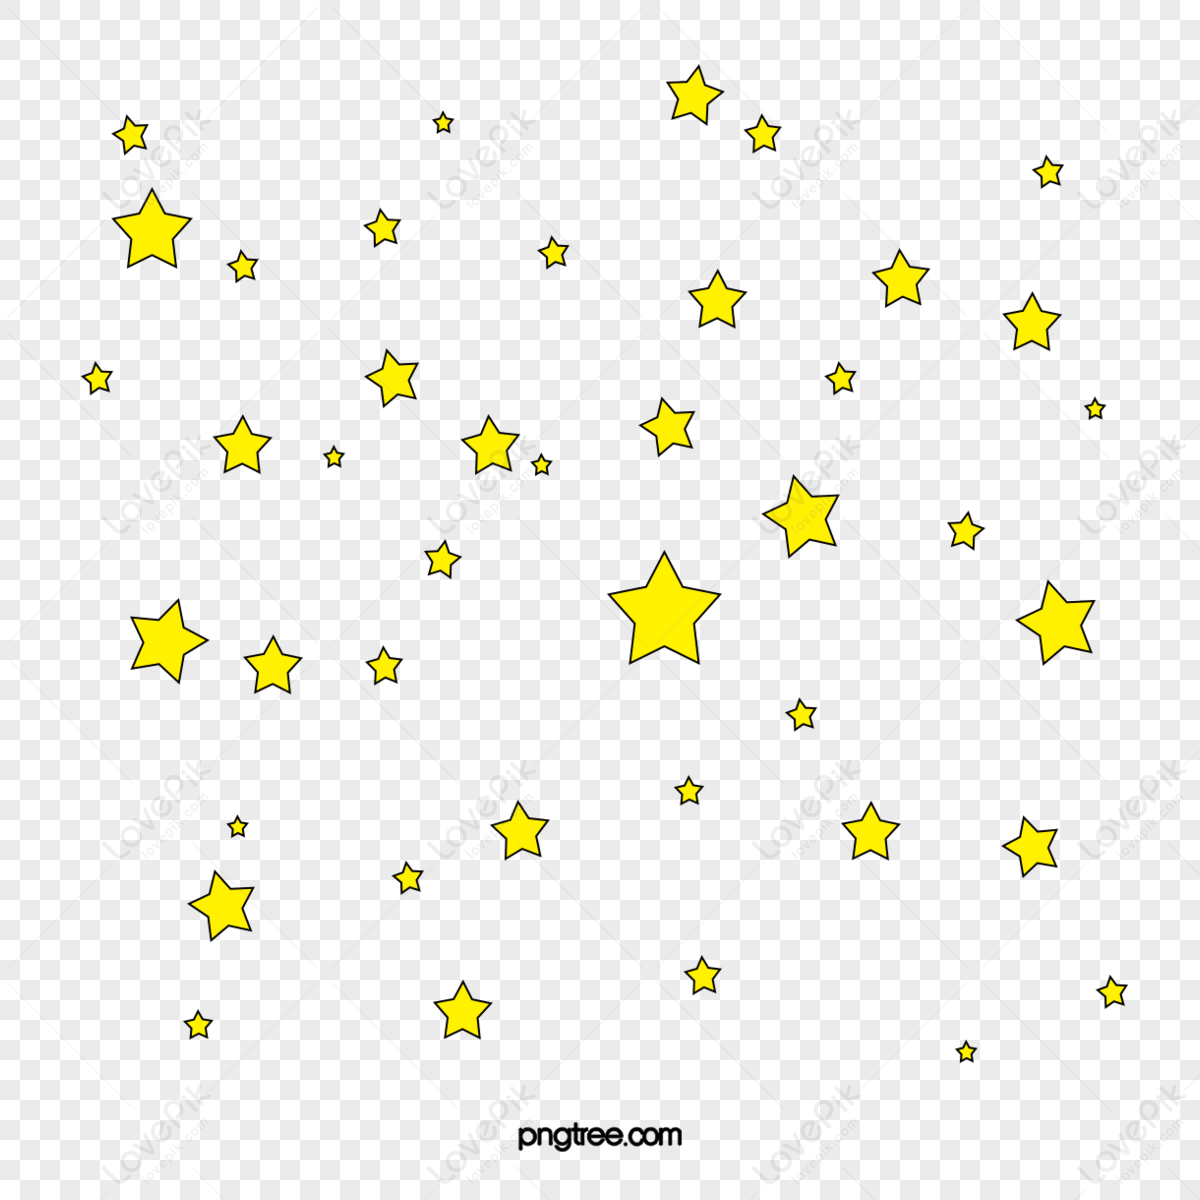 Twinkle PNG Images With Transparent Background